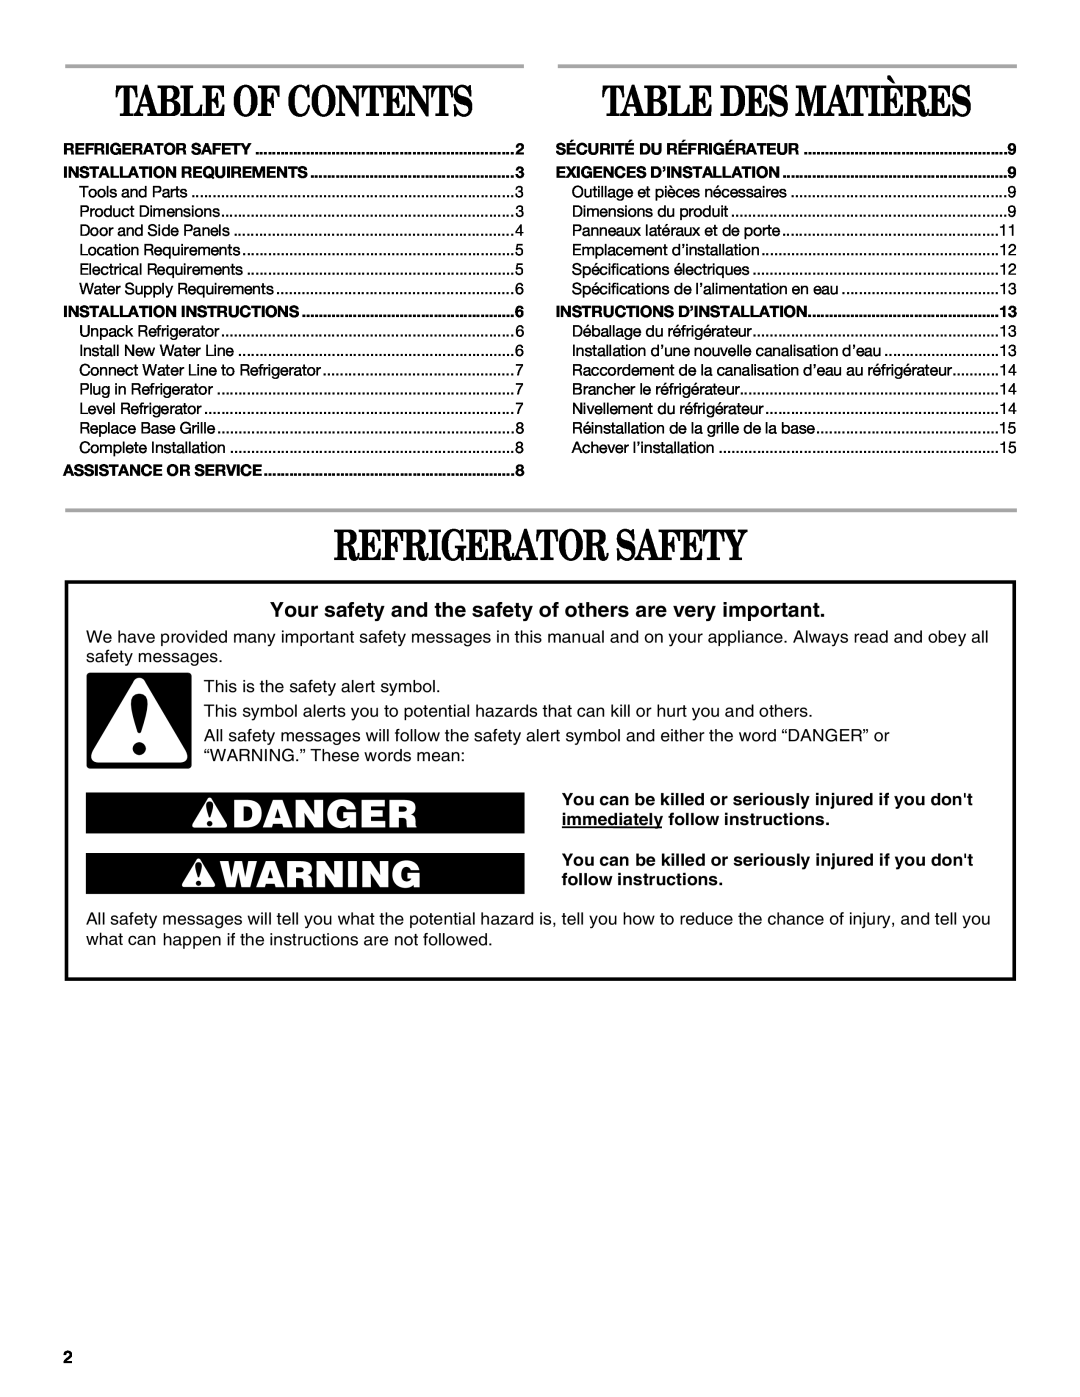 Whirlpool 2221515 installation instructions Refrigerator Safety, Table Of Contents, Table Des Matières 